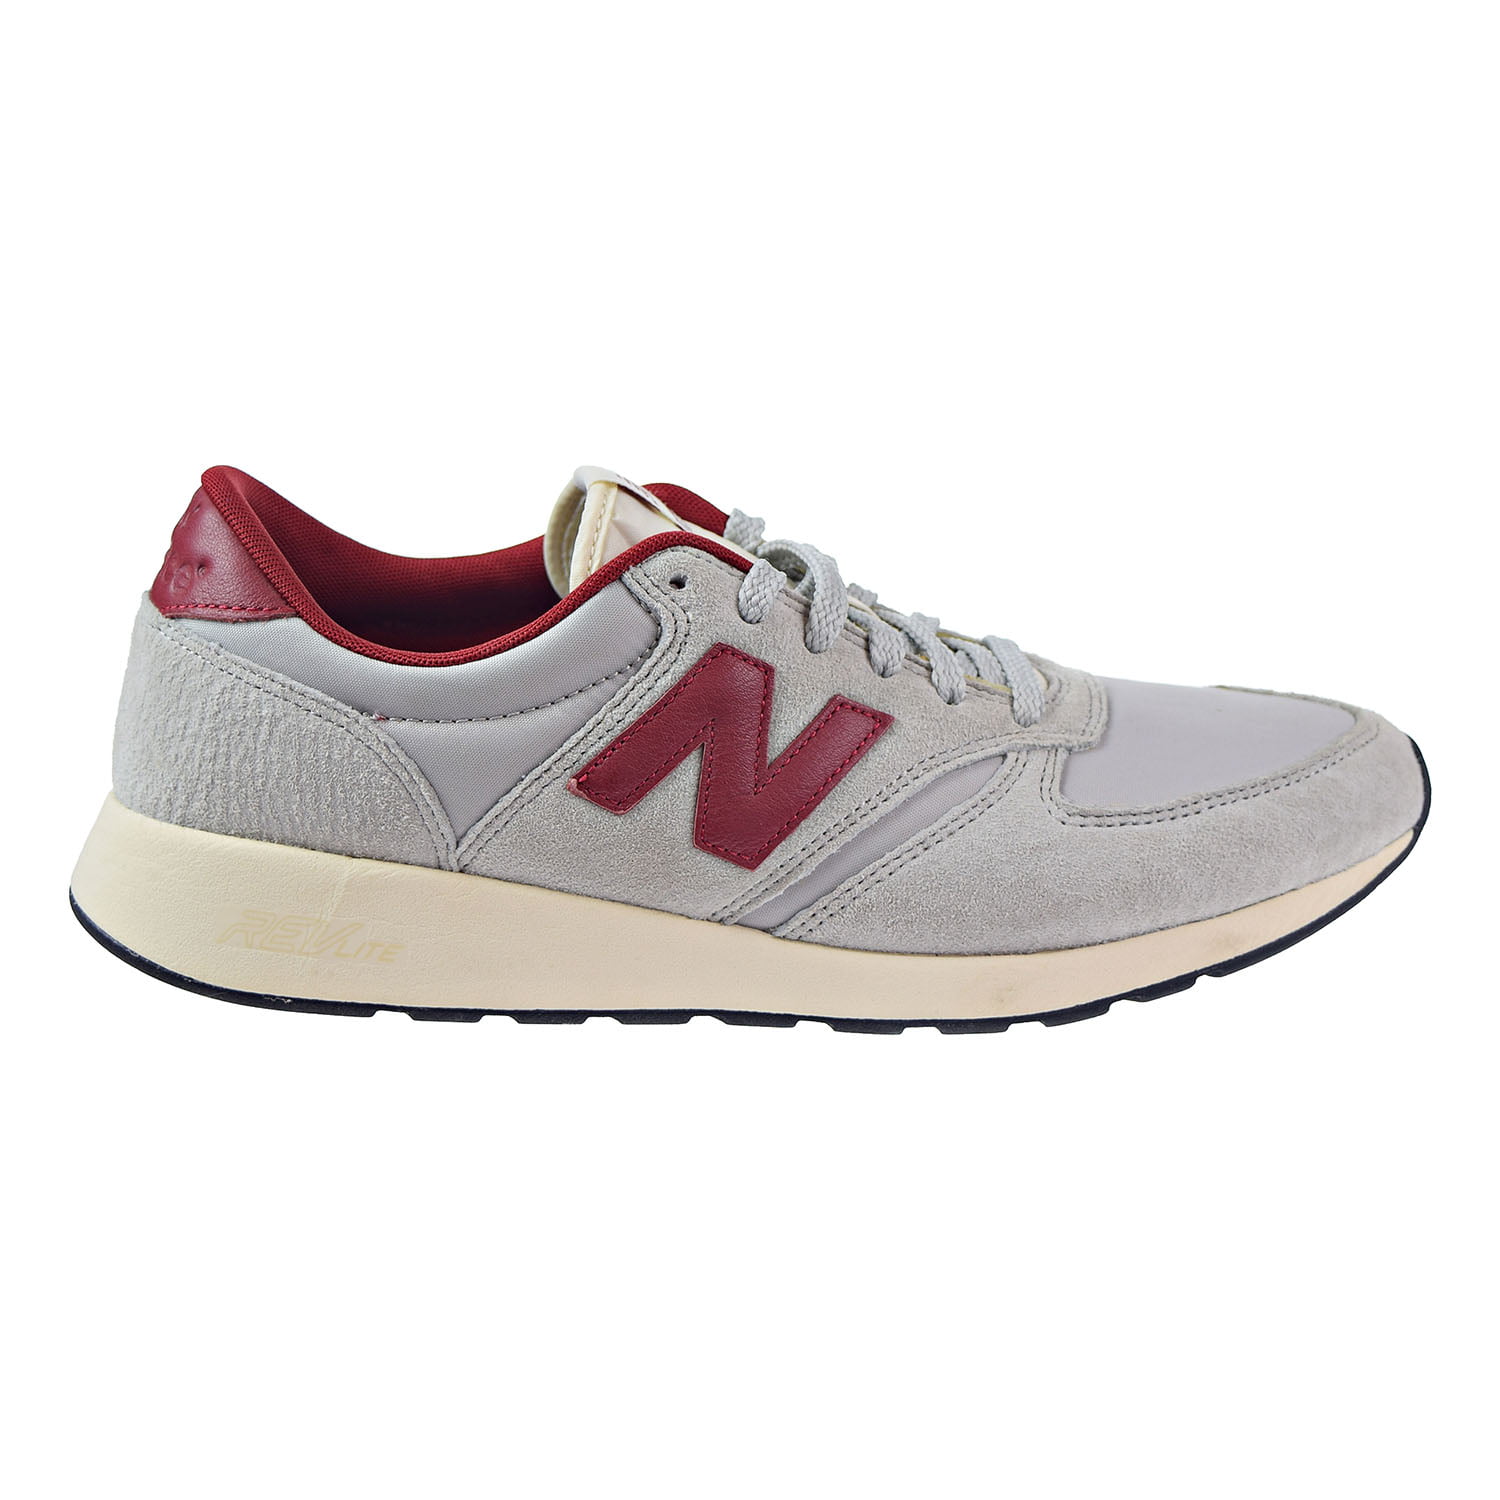 New Balance 420 Lifestyle Men's Shoes Grey/Red mrl420-st